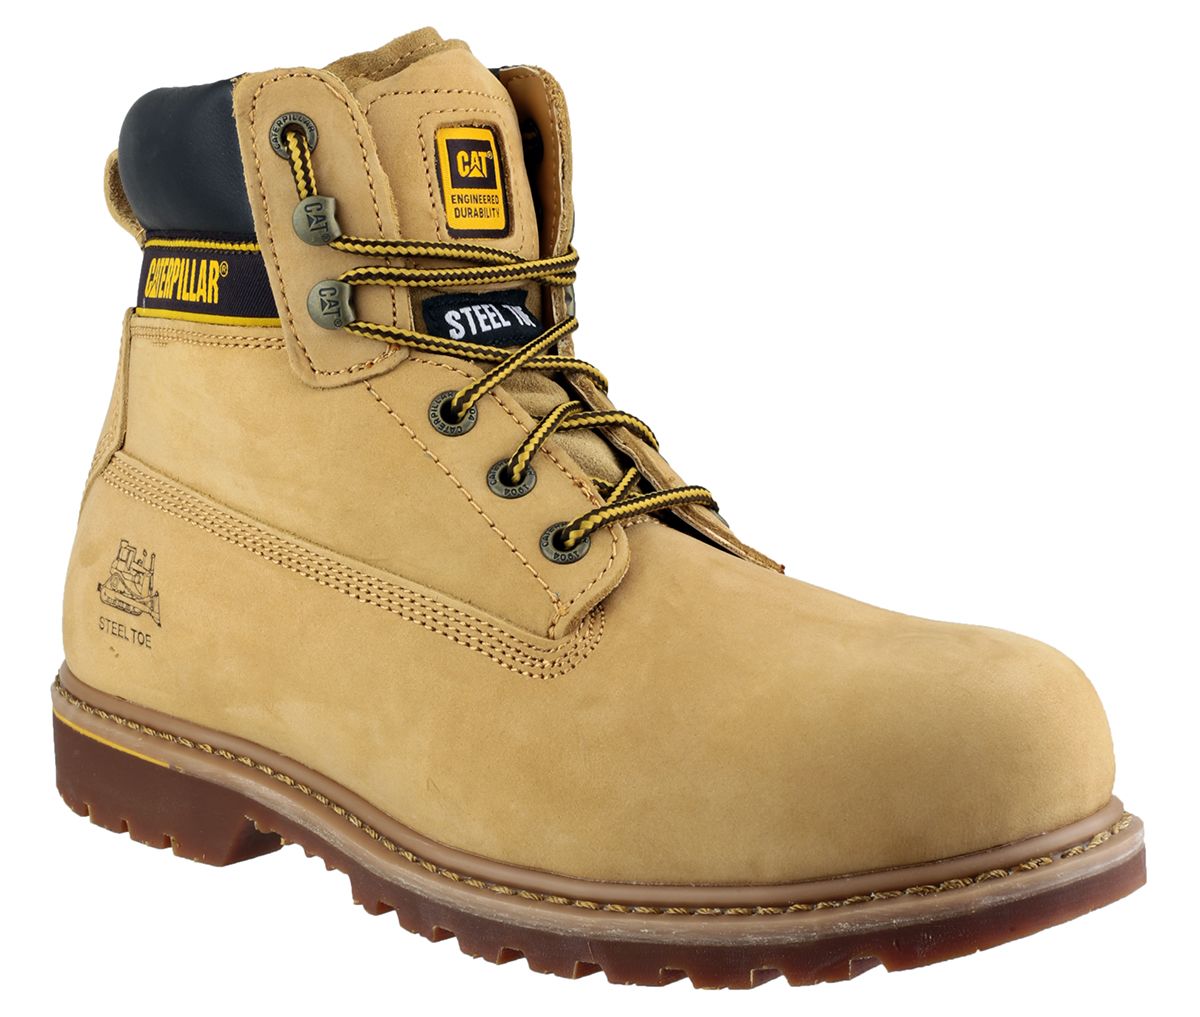 CAT Holton Honey Steel Toe Capped Mens Safety Boots, UK 8, EU 42